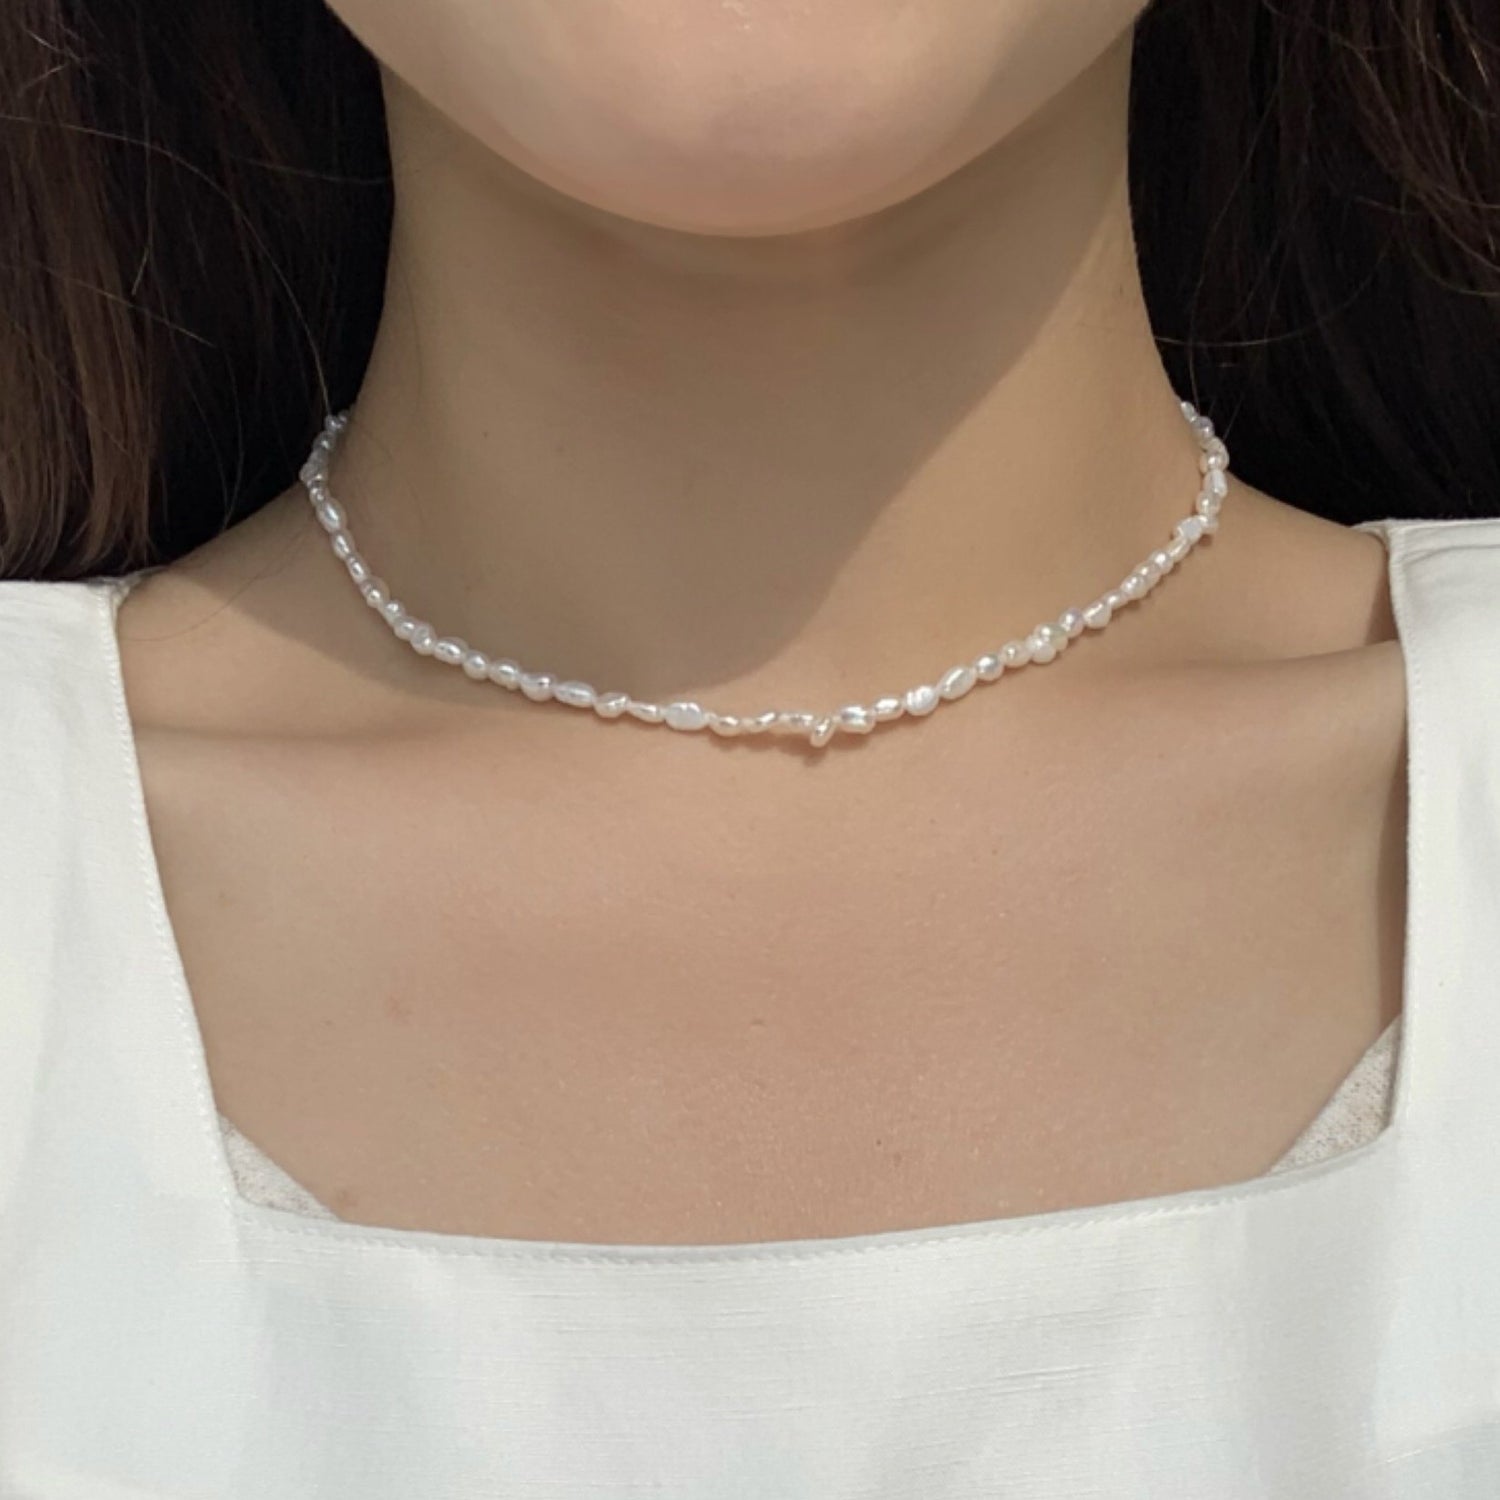 Baroque Freshwater  cultured Pearls Choker Necklace - MARMELO USA